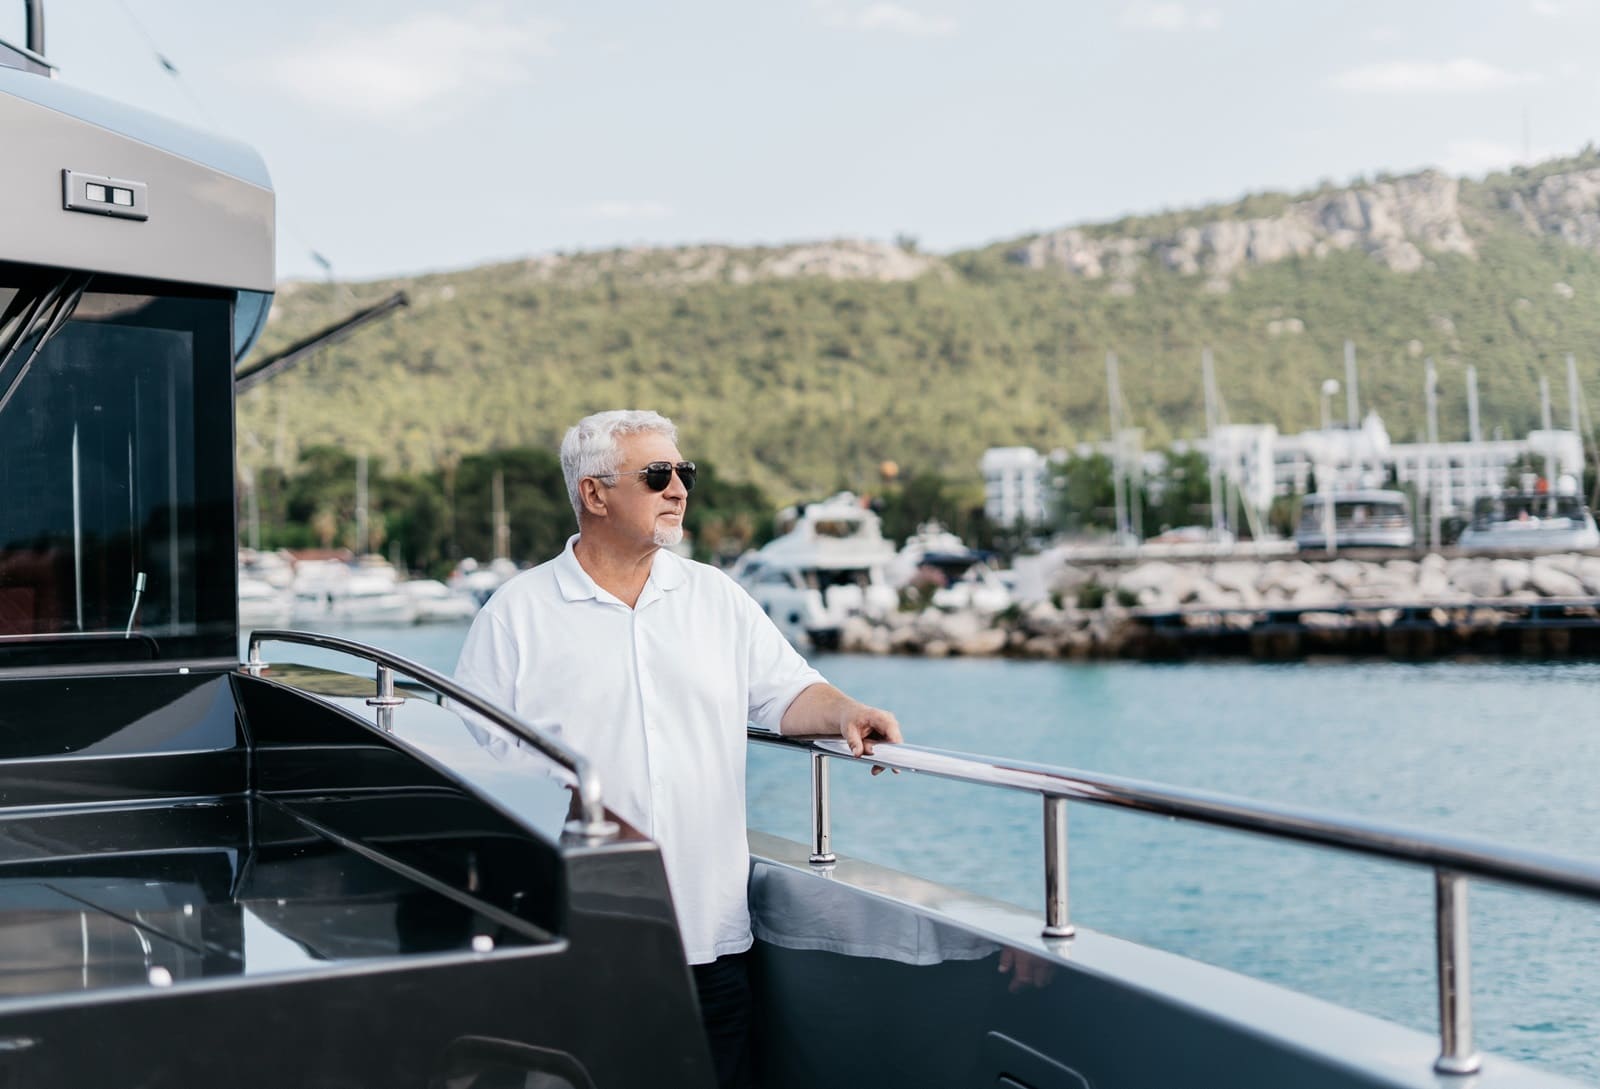 Bering Yachts: Supporting an International Initiative